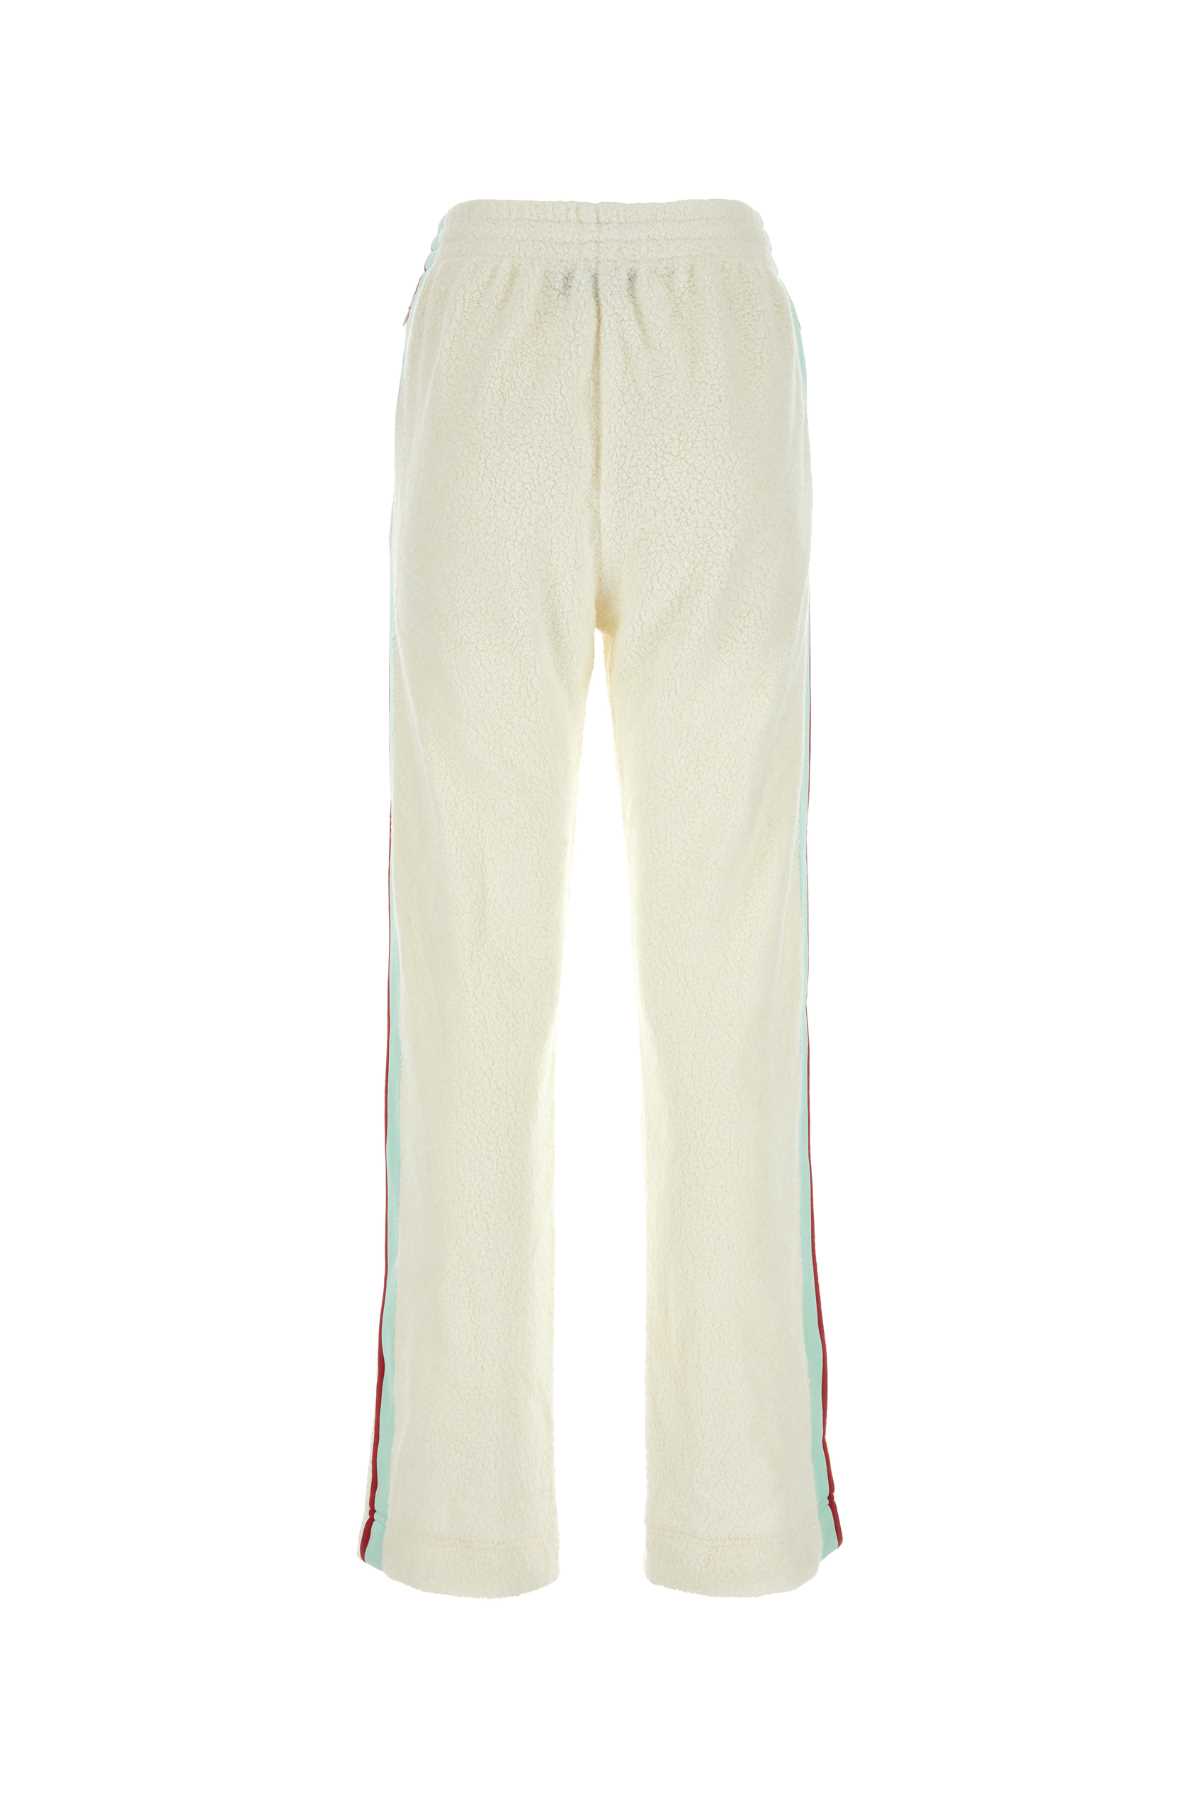 Casablanca Ivory Terry Fabric Joggers In Offwhite